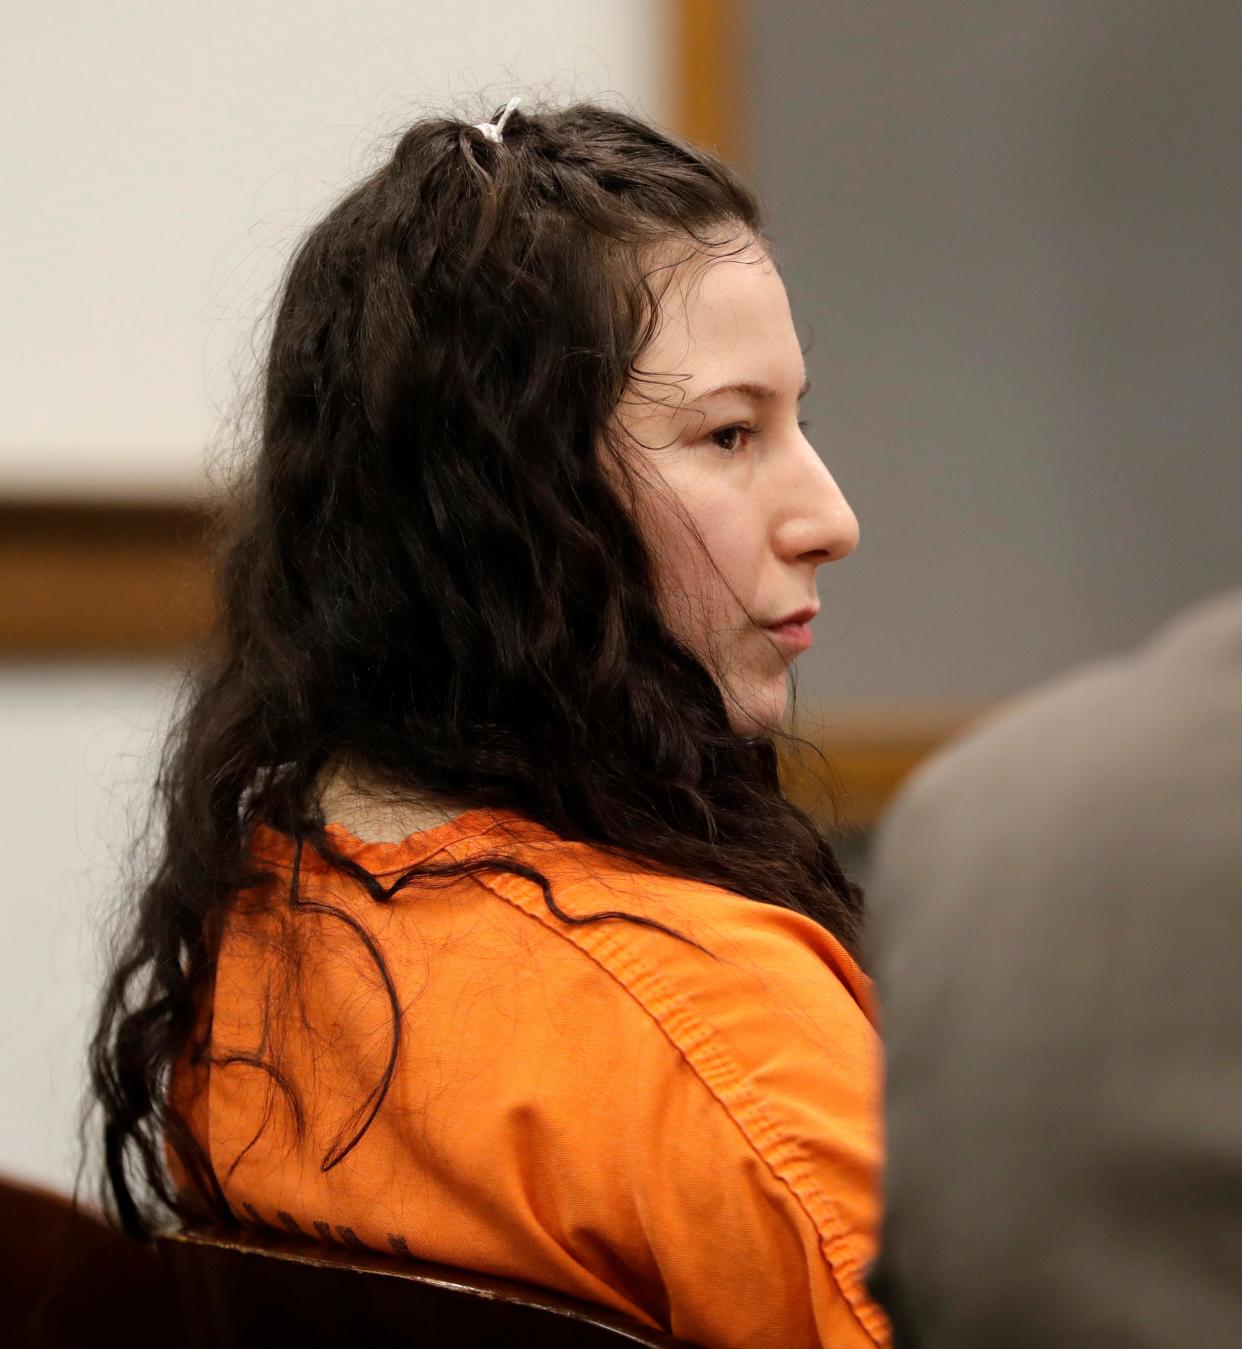 Taylor Schabusiness, who is charged with first-degree intentional homicide, third-degree sexual assault and mutilating a corpse, appears in court for a competency hearing on Jan. 6 in Green Bay.